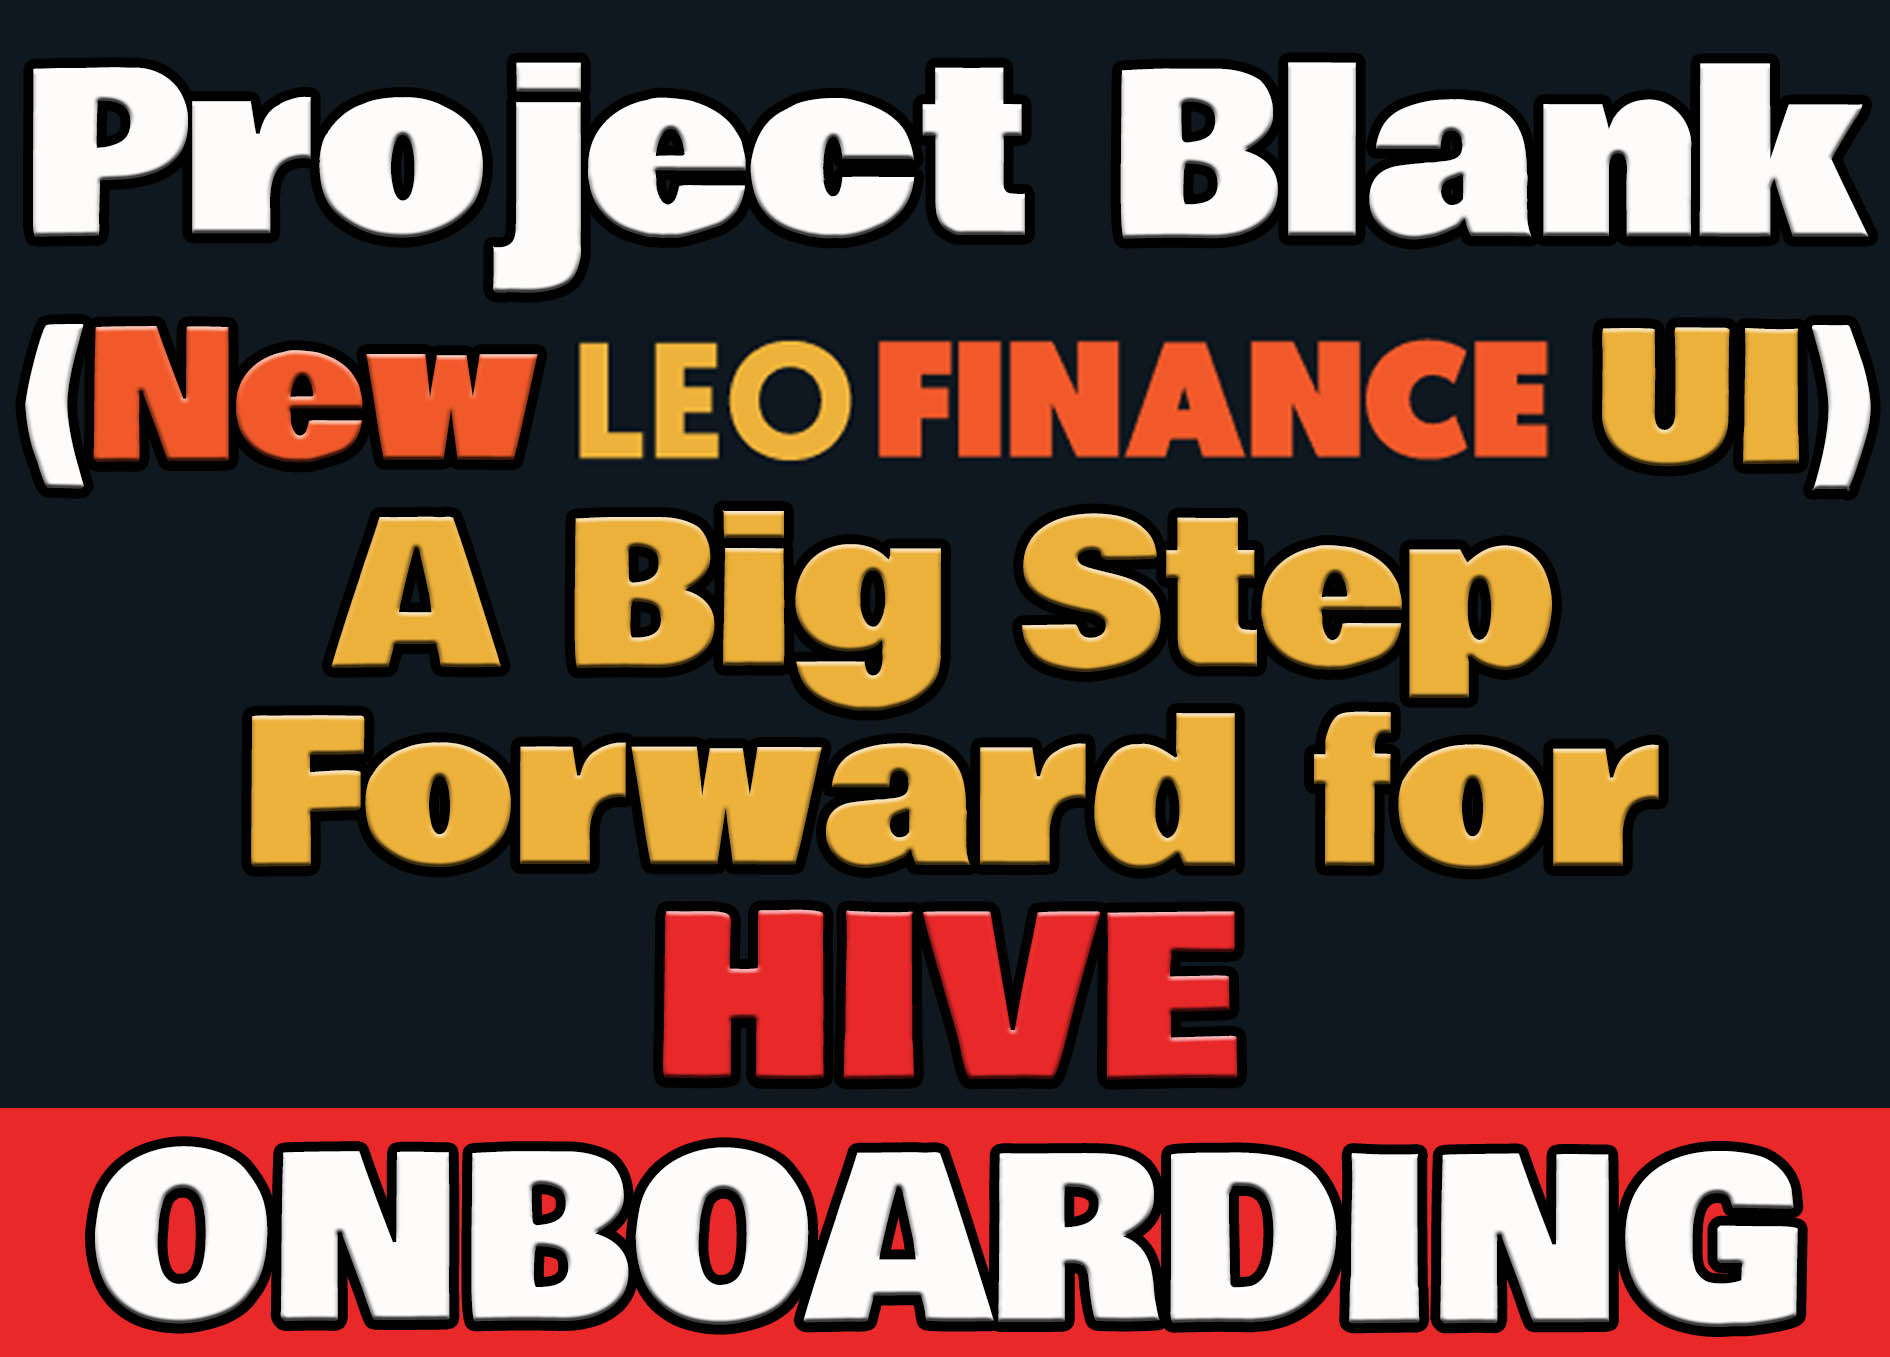 @libertycrypto27/project-blank-leofinance-new-ui-a-big-step-forward-for-onboarding-web-2-0-users-on-hive-in-a-user-friendly-way-my-leo-power-up